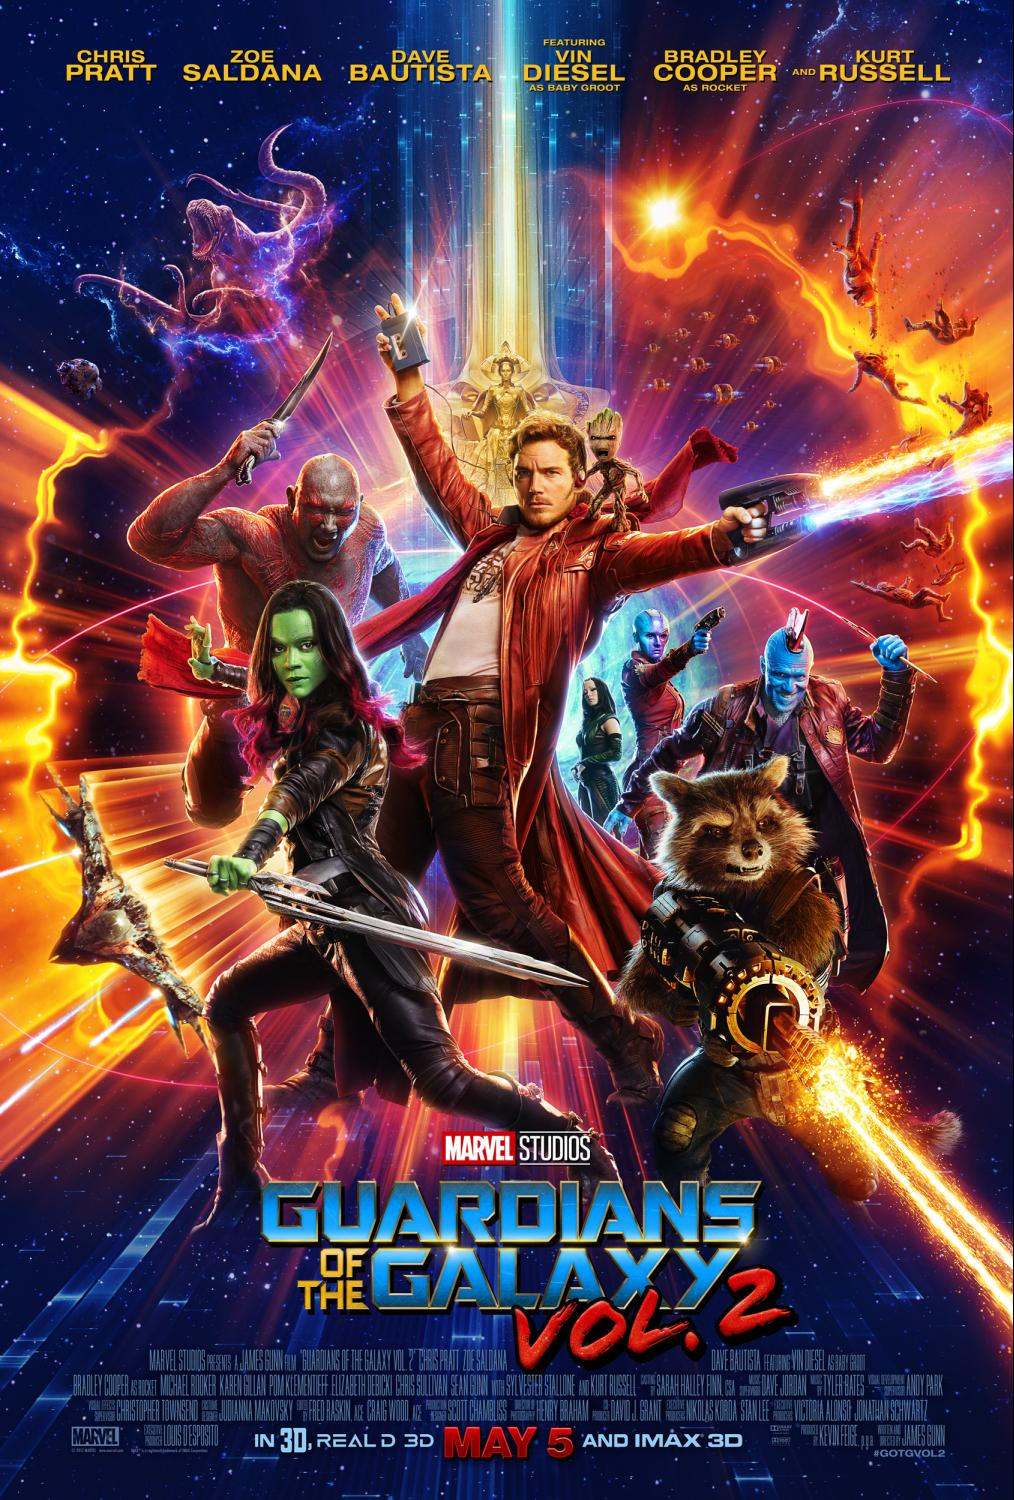 Guardians of the Galaxy Vol. 2, Guardians of the Galaxy Vol. 2 Review, Guardians of the Galaxy Vol 2 Spoiler Free Review